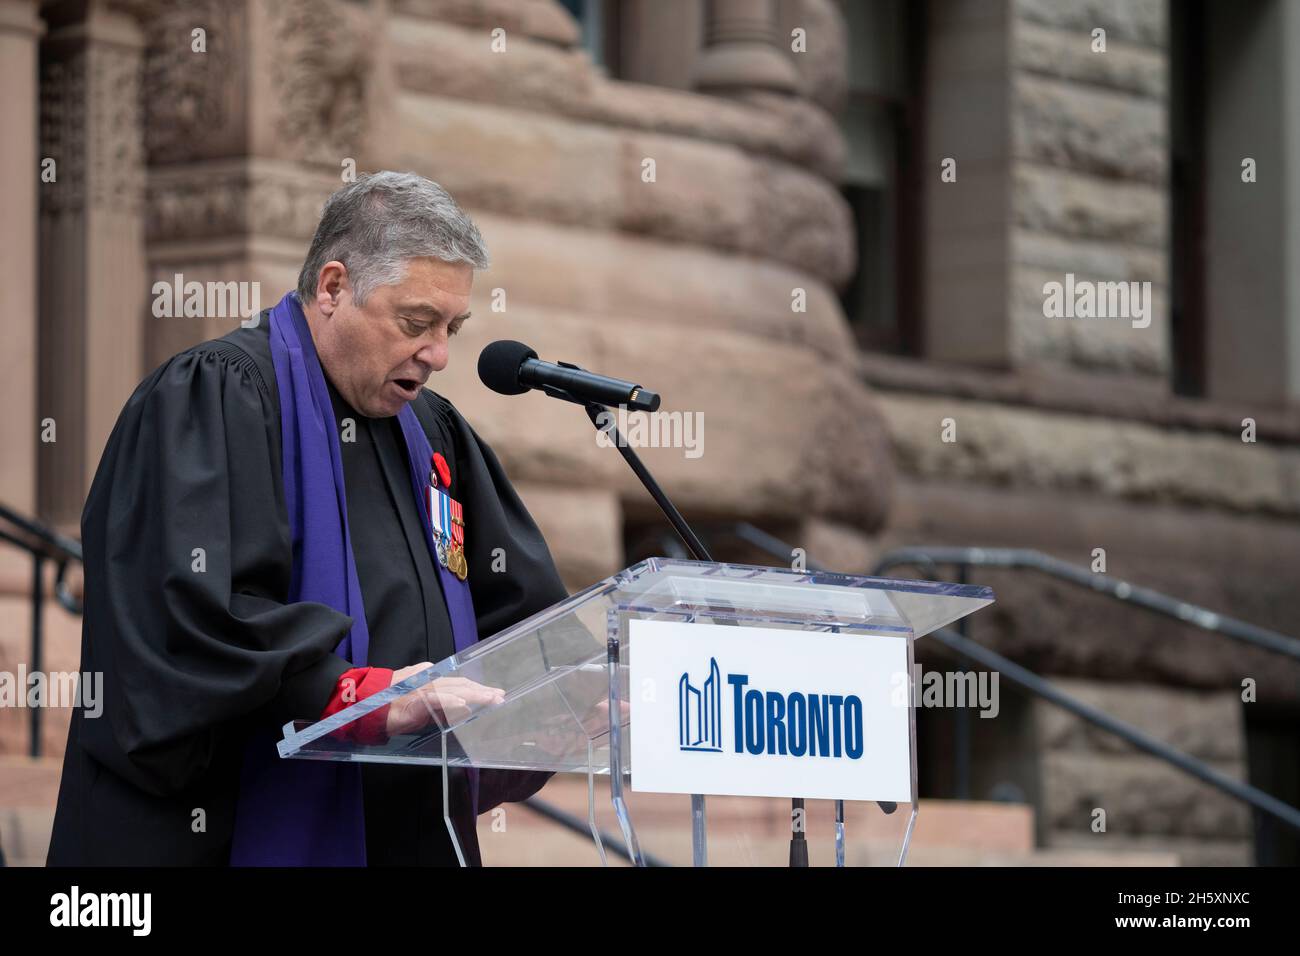 Chaplain Philip C. Ralph, Captain (Ret'd) for Wounded Warriors Canada gives Benediction, Remembrance Day Ceremony, Old City Hall, Toronto, Canada 2021 Stock Photo